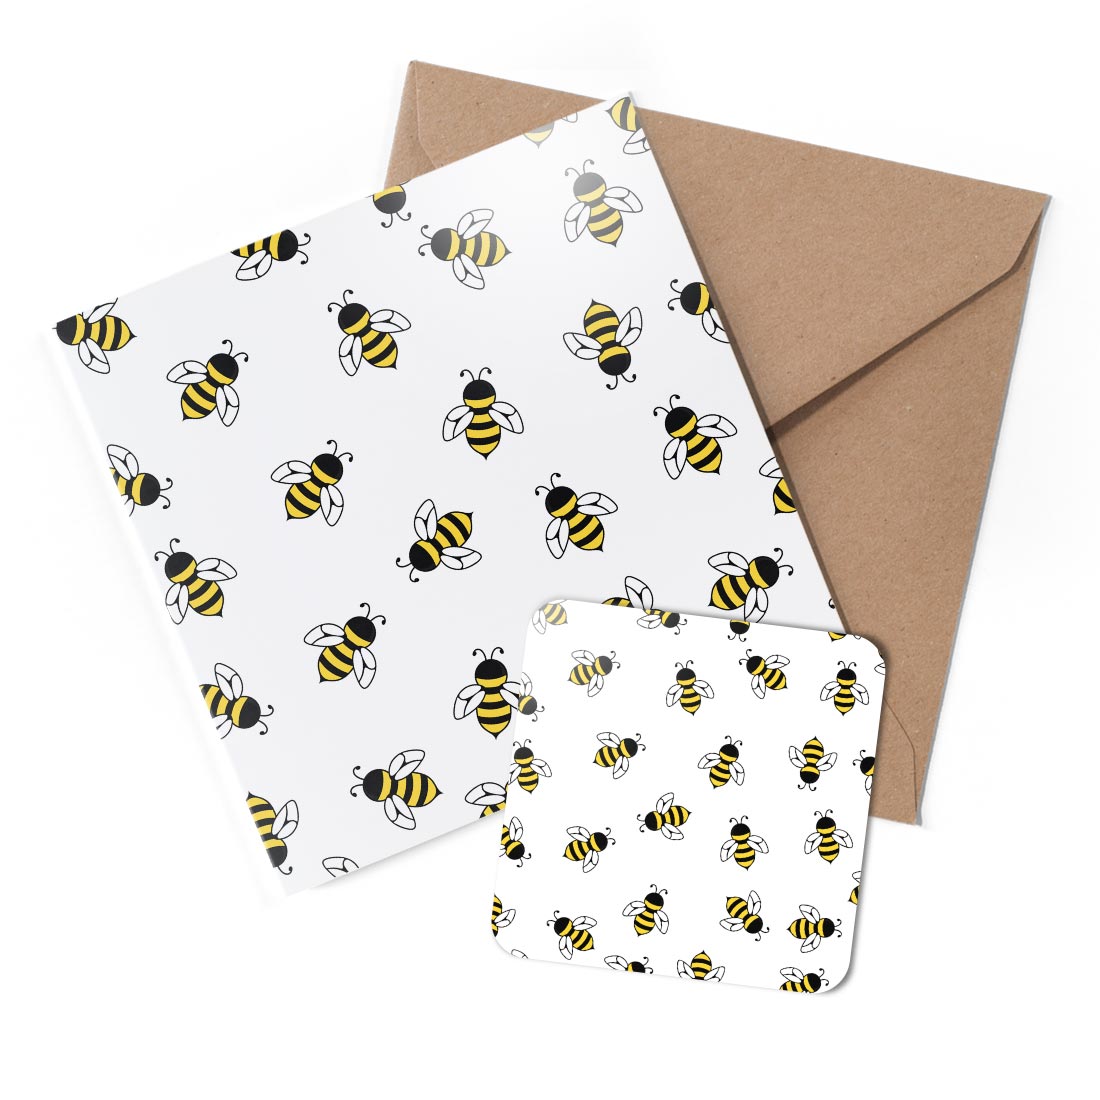 1 x Greeting Card & Coaster Set - Little Bumble Bee Pattern #51346